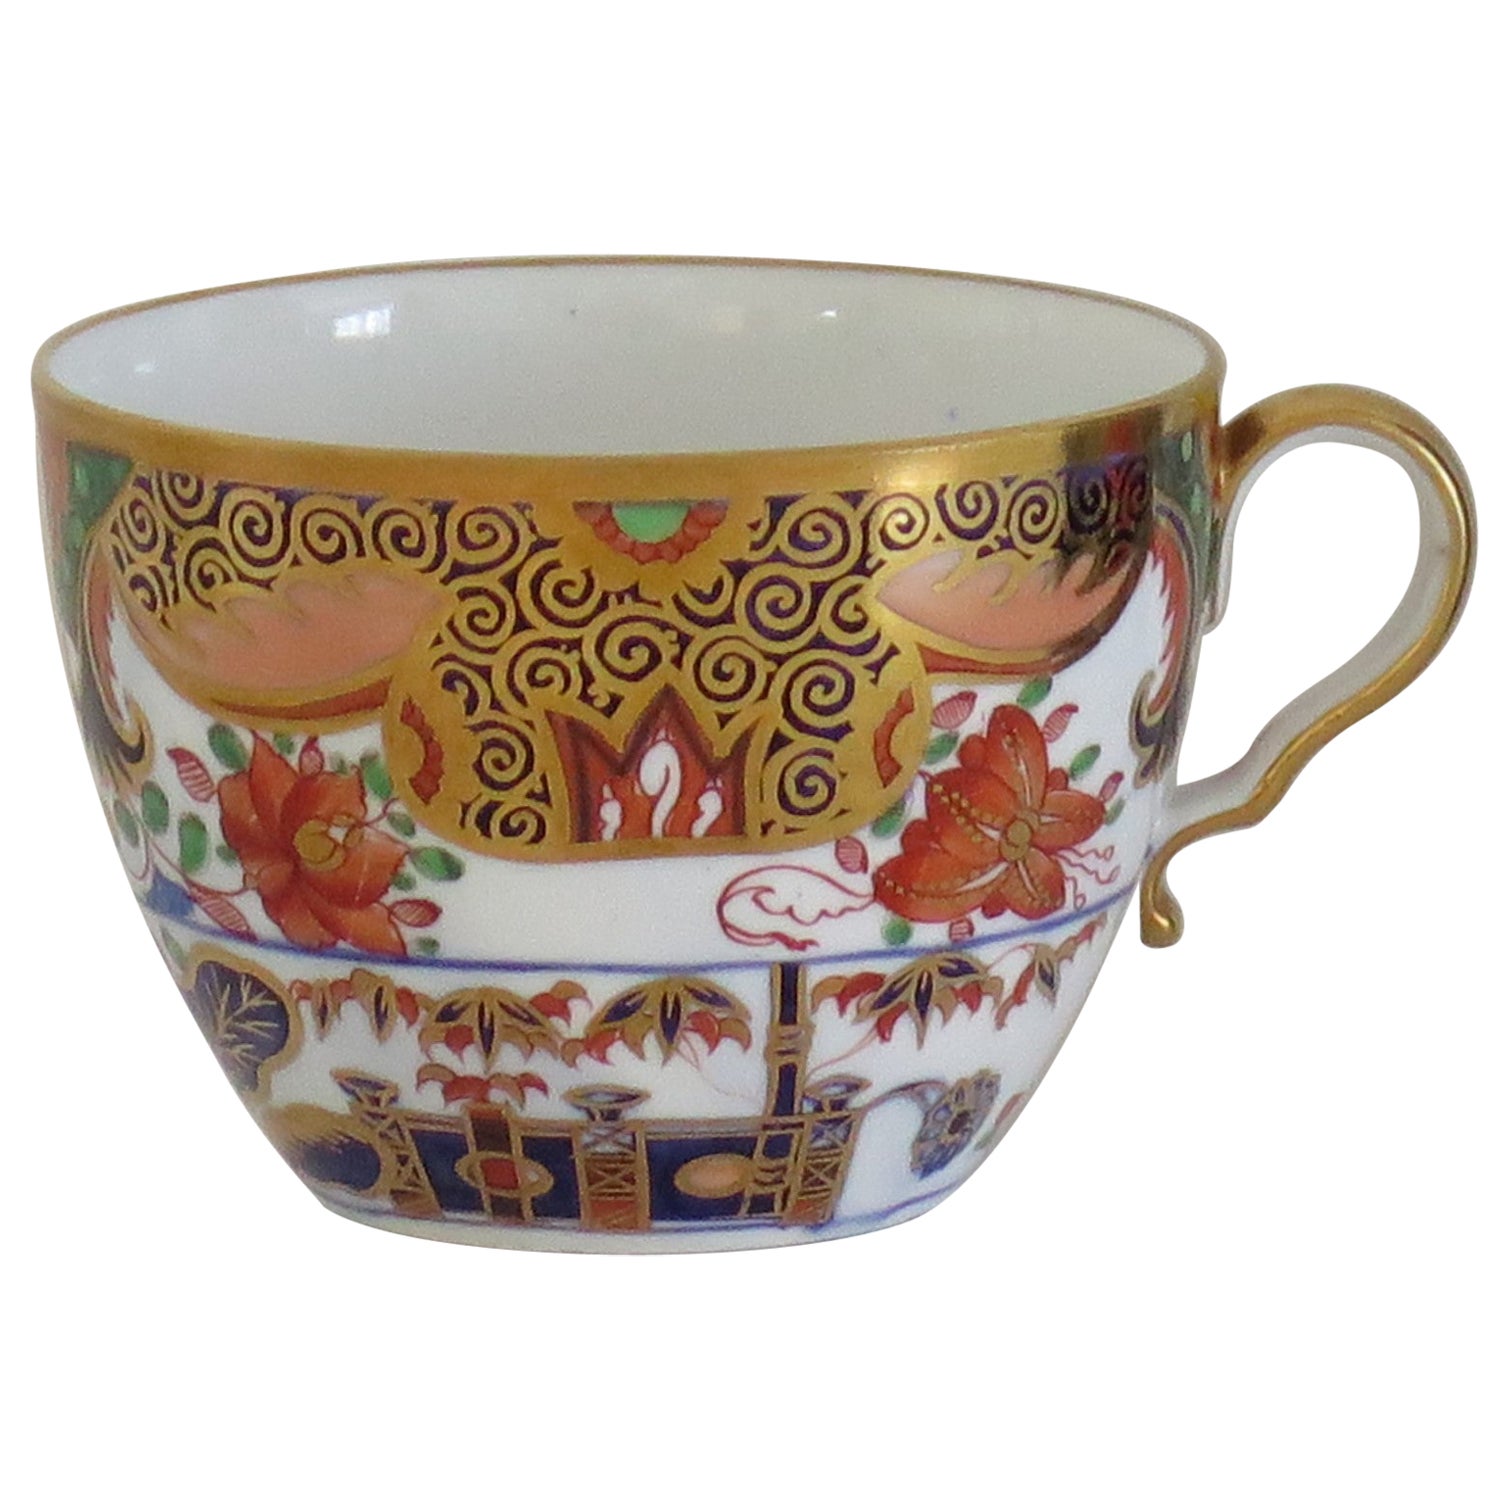 Spode Porcelain Tea Cup in Hand Painted & Gilded Pattern 967, circa 1810